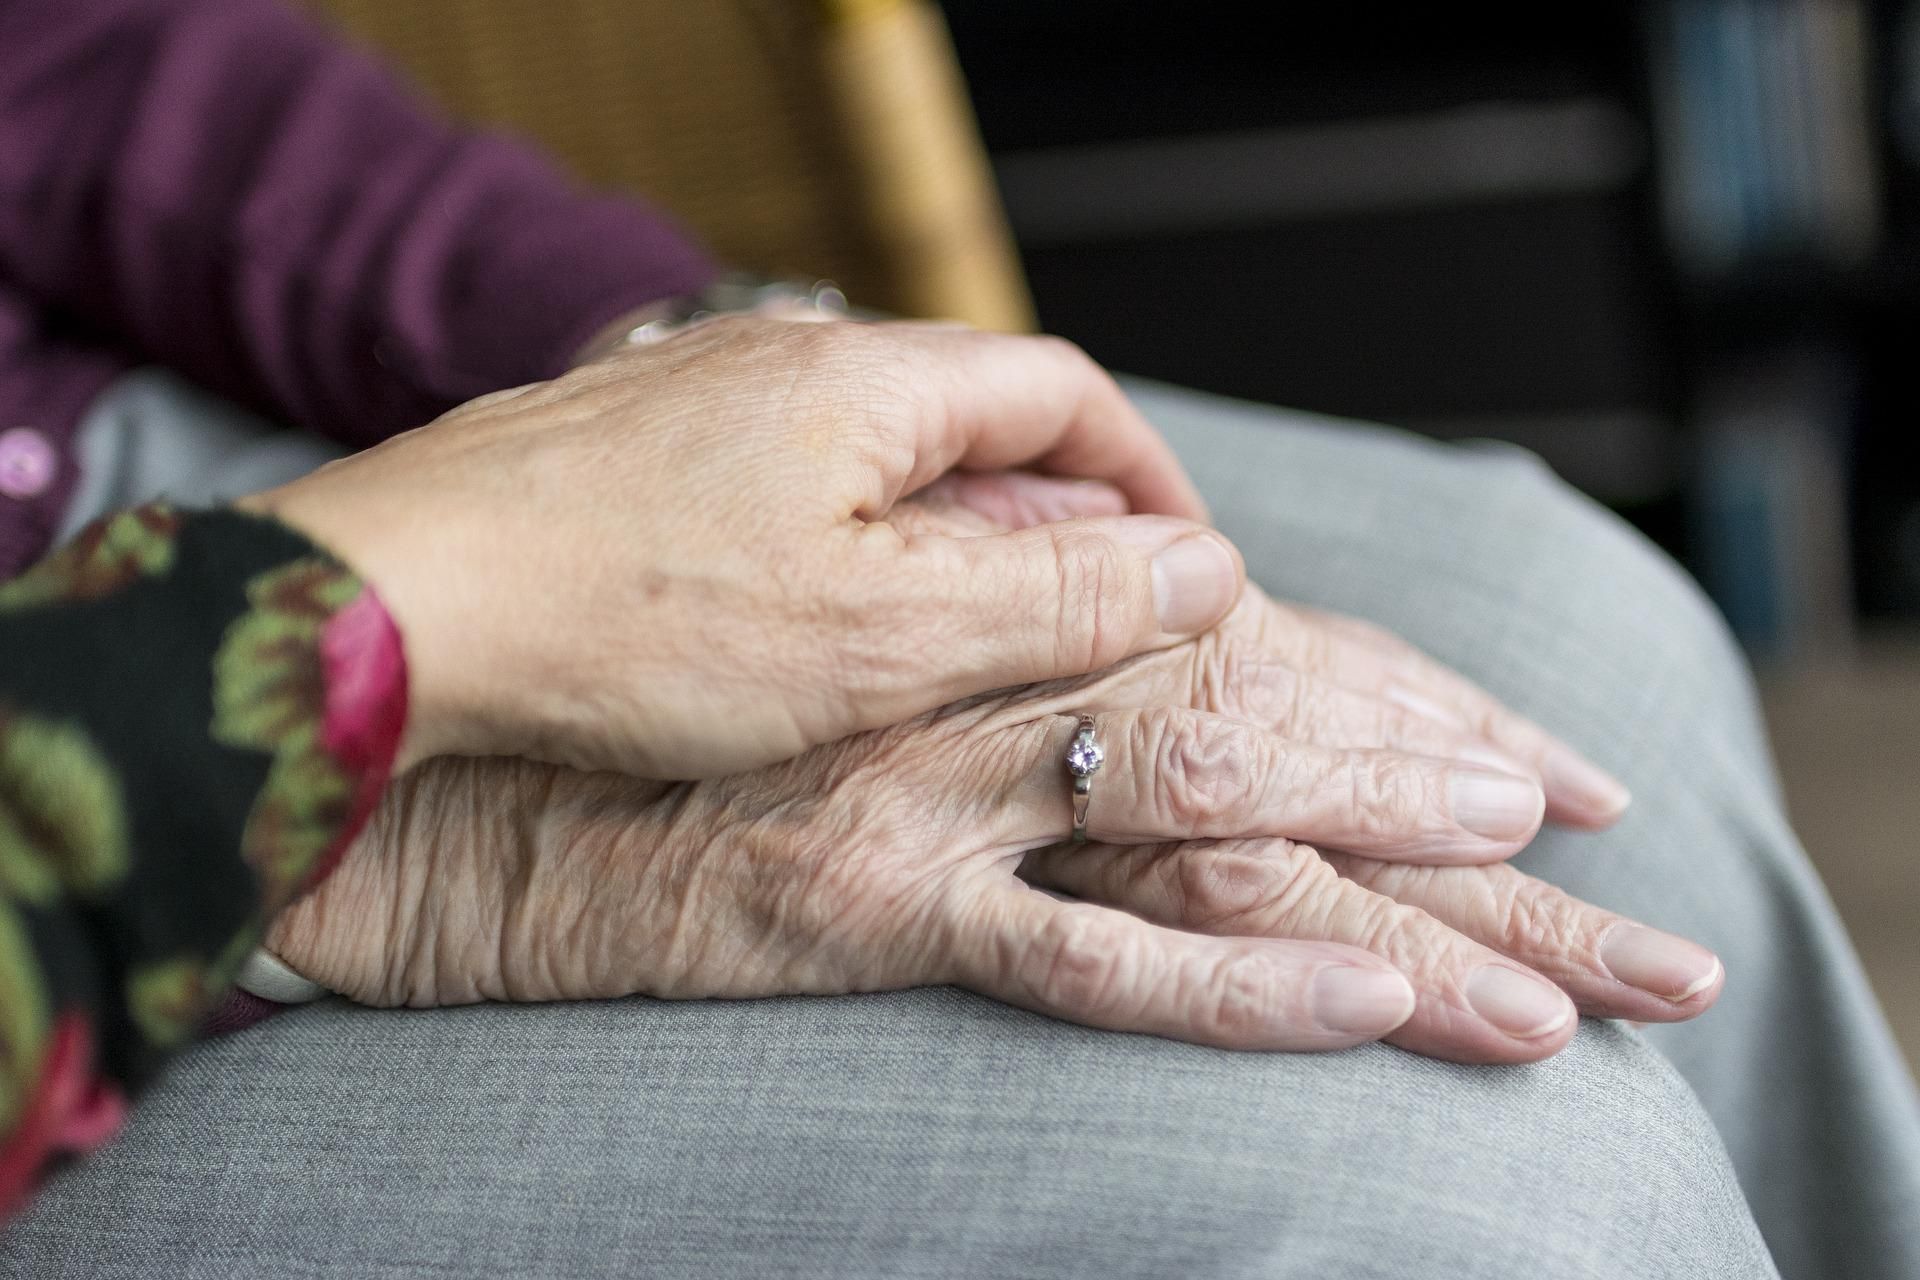 Young person holding an elderly person's hand